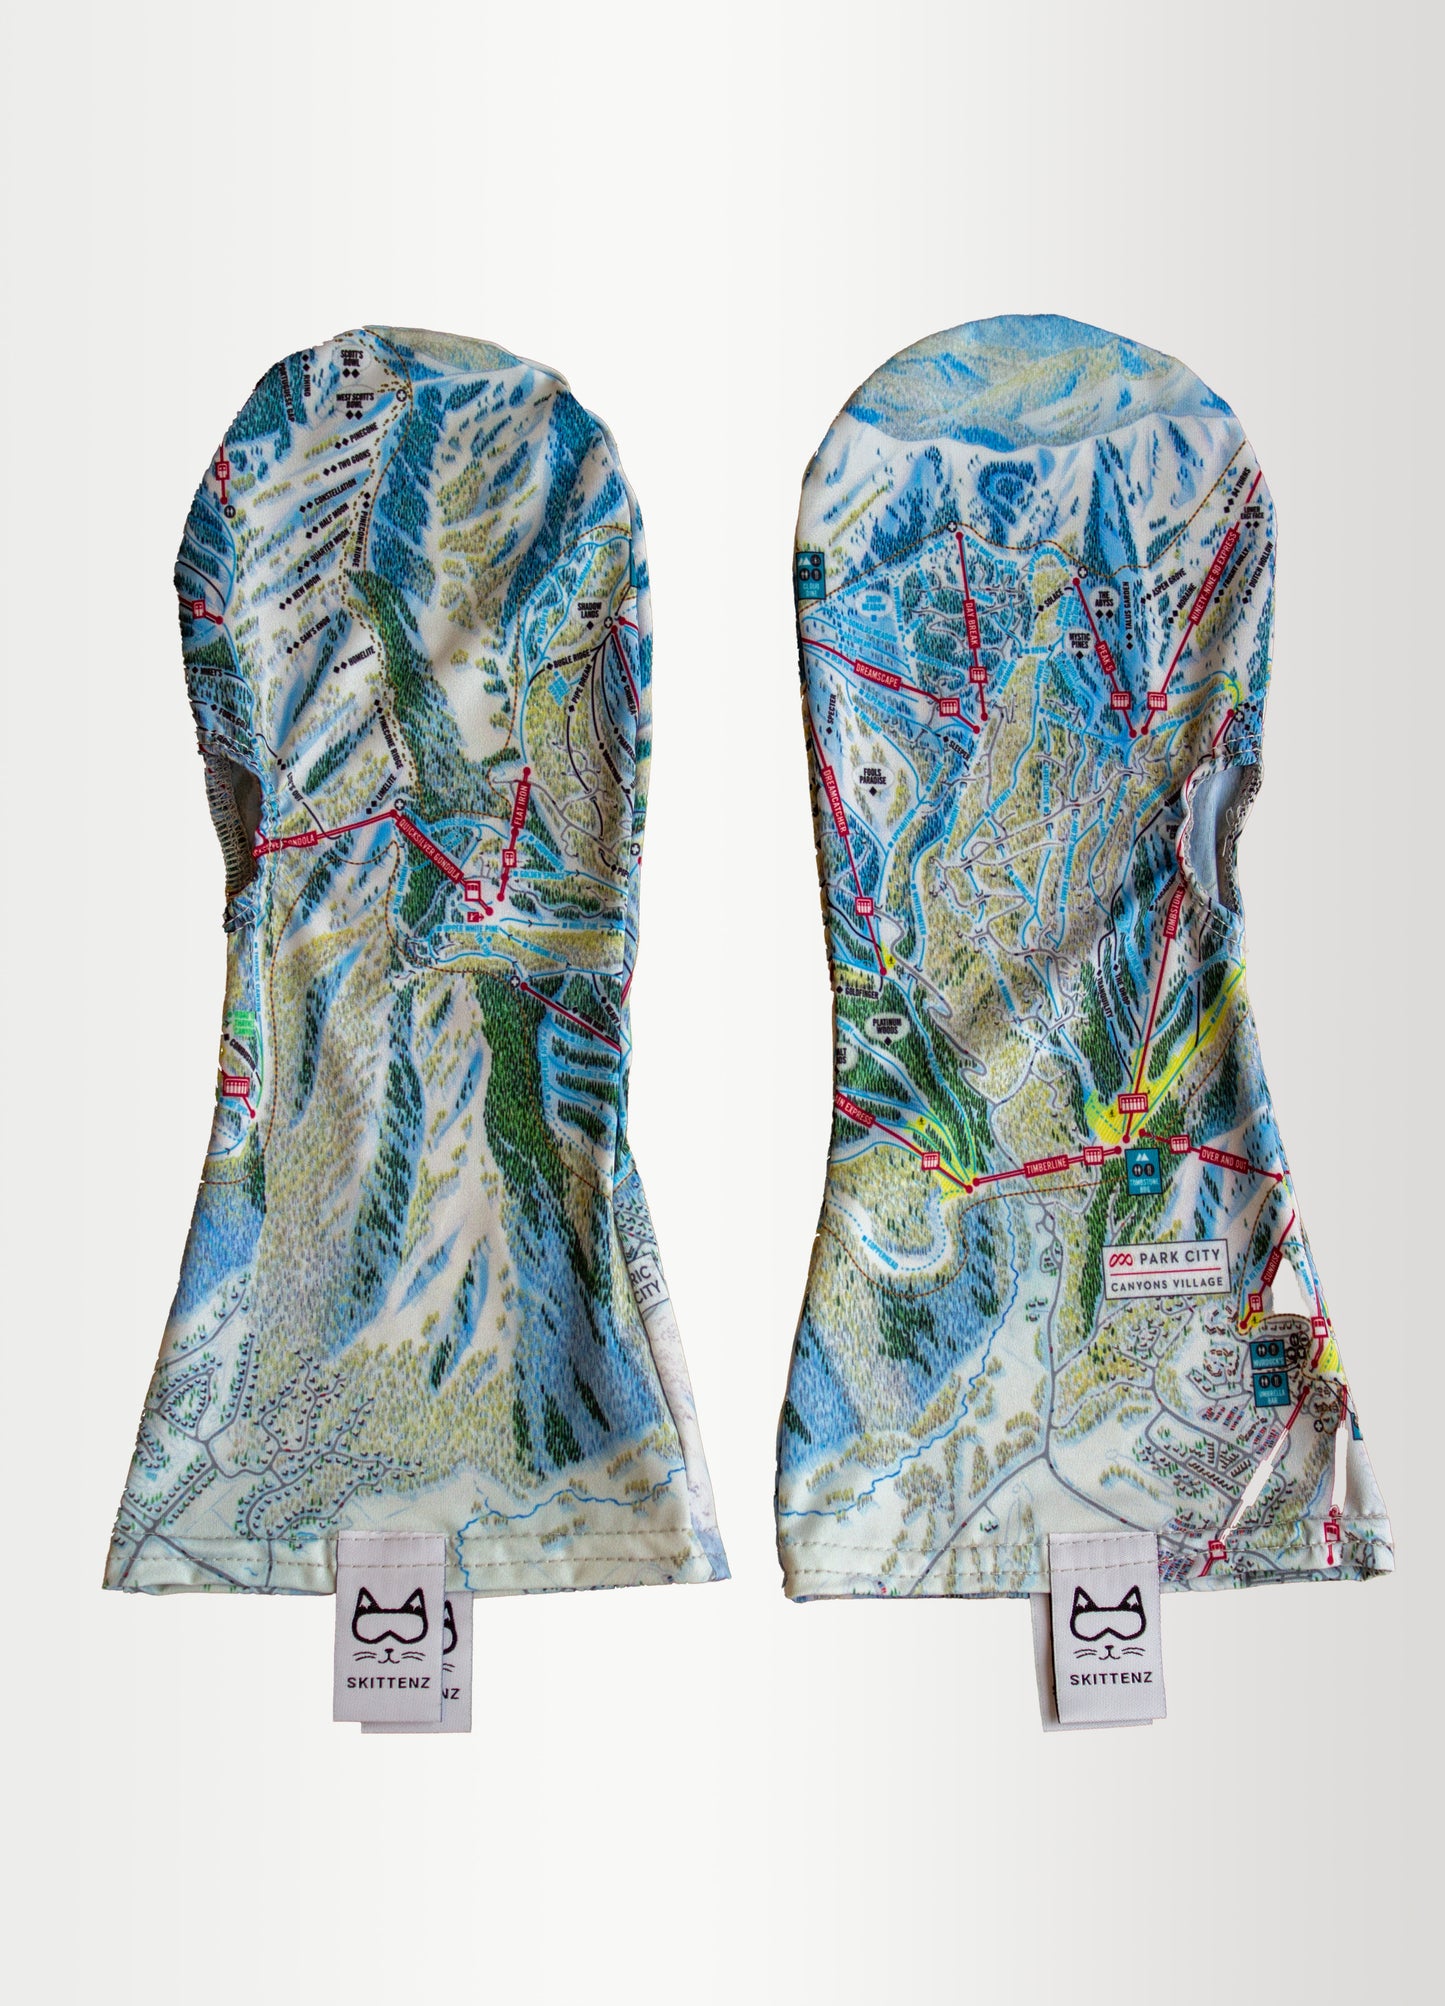 Park City Ski or Snowboard Trail Map Skins for Mittens or Gloves